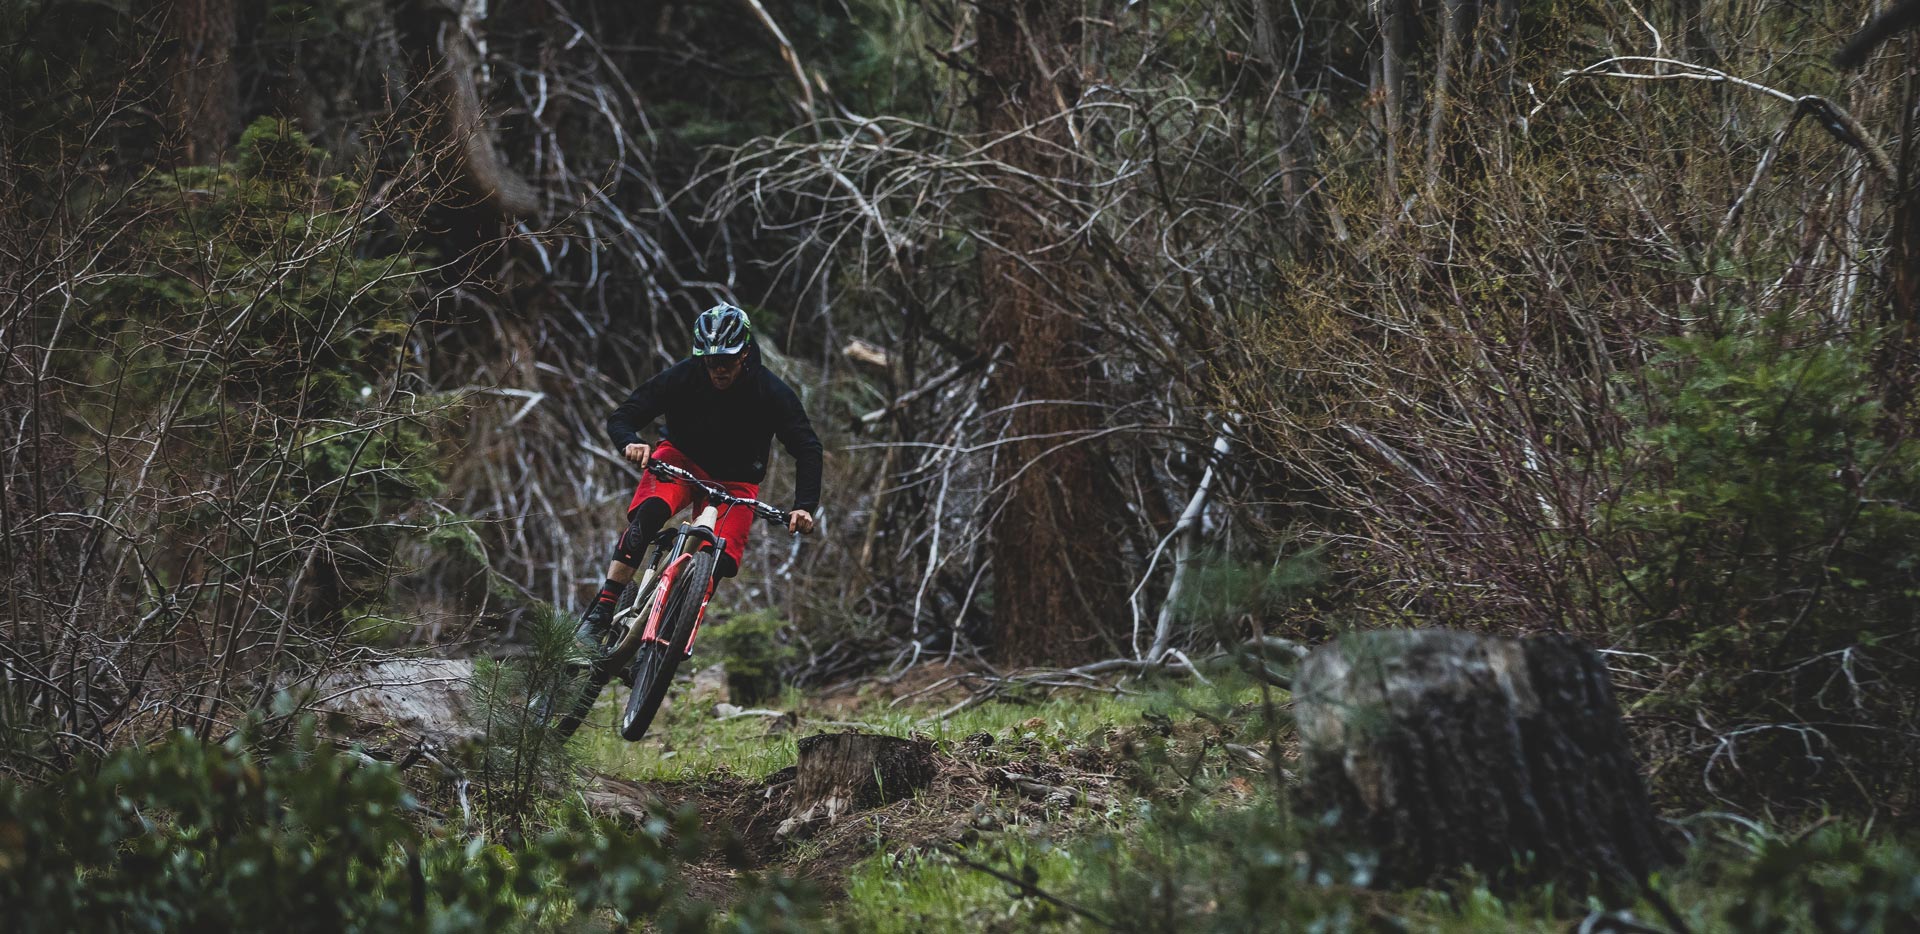 Interview - Cam Zink: Zink has been hard at work on his 170-acre property, which is now home to freeride lines and downhill tracks. Photo by Ryan Cleek